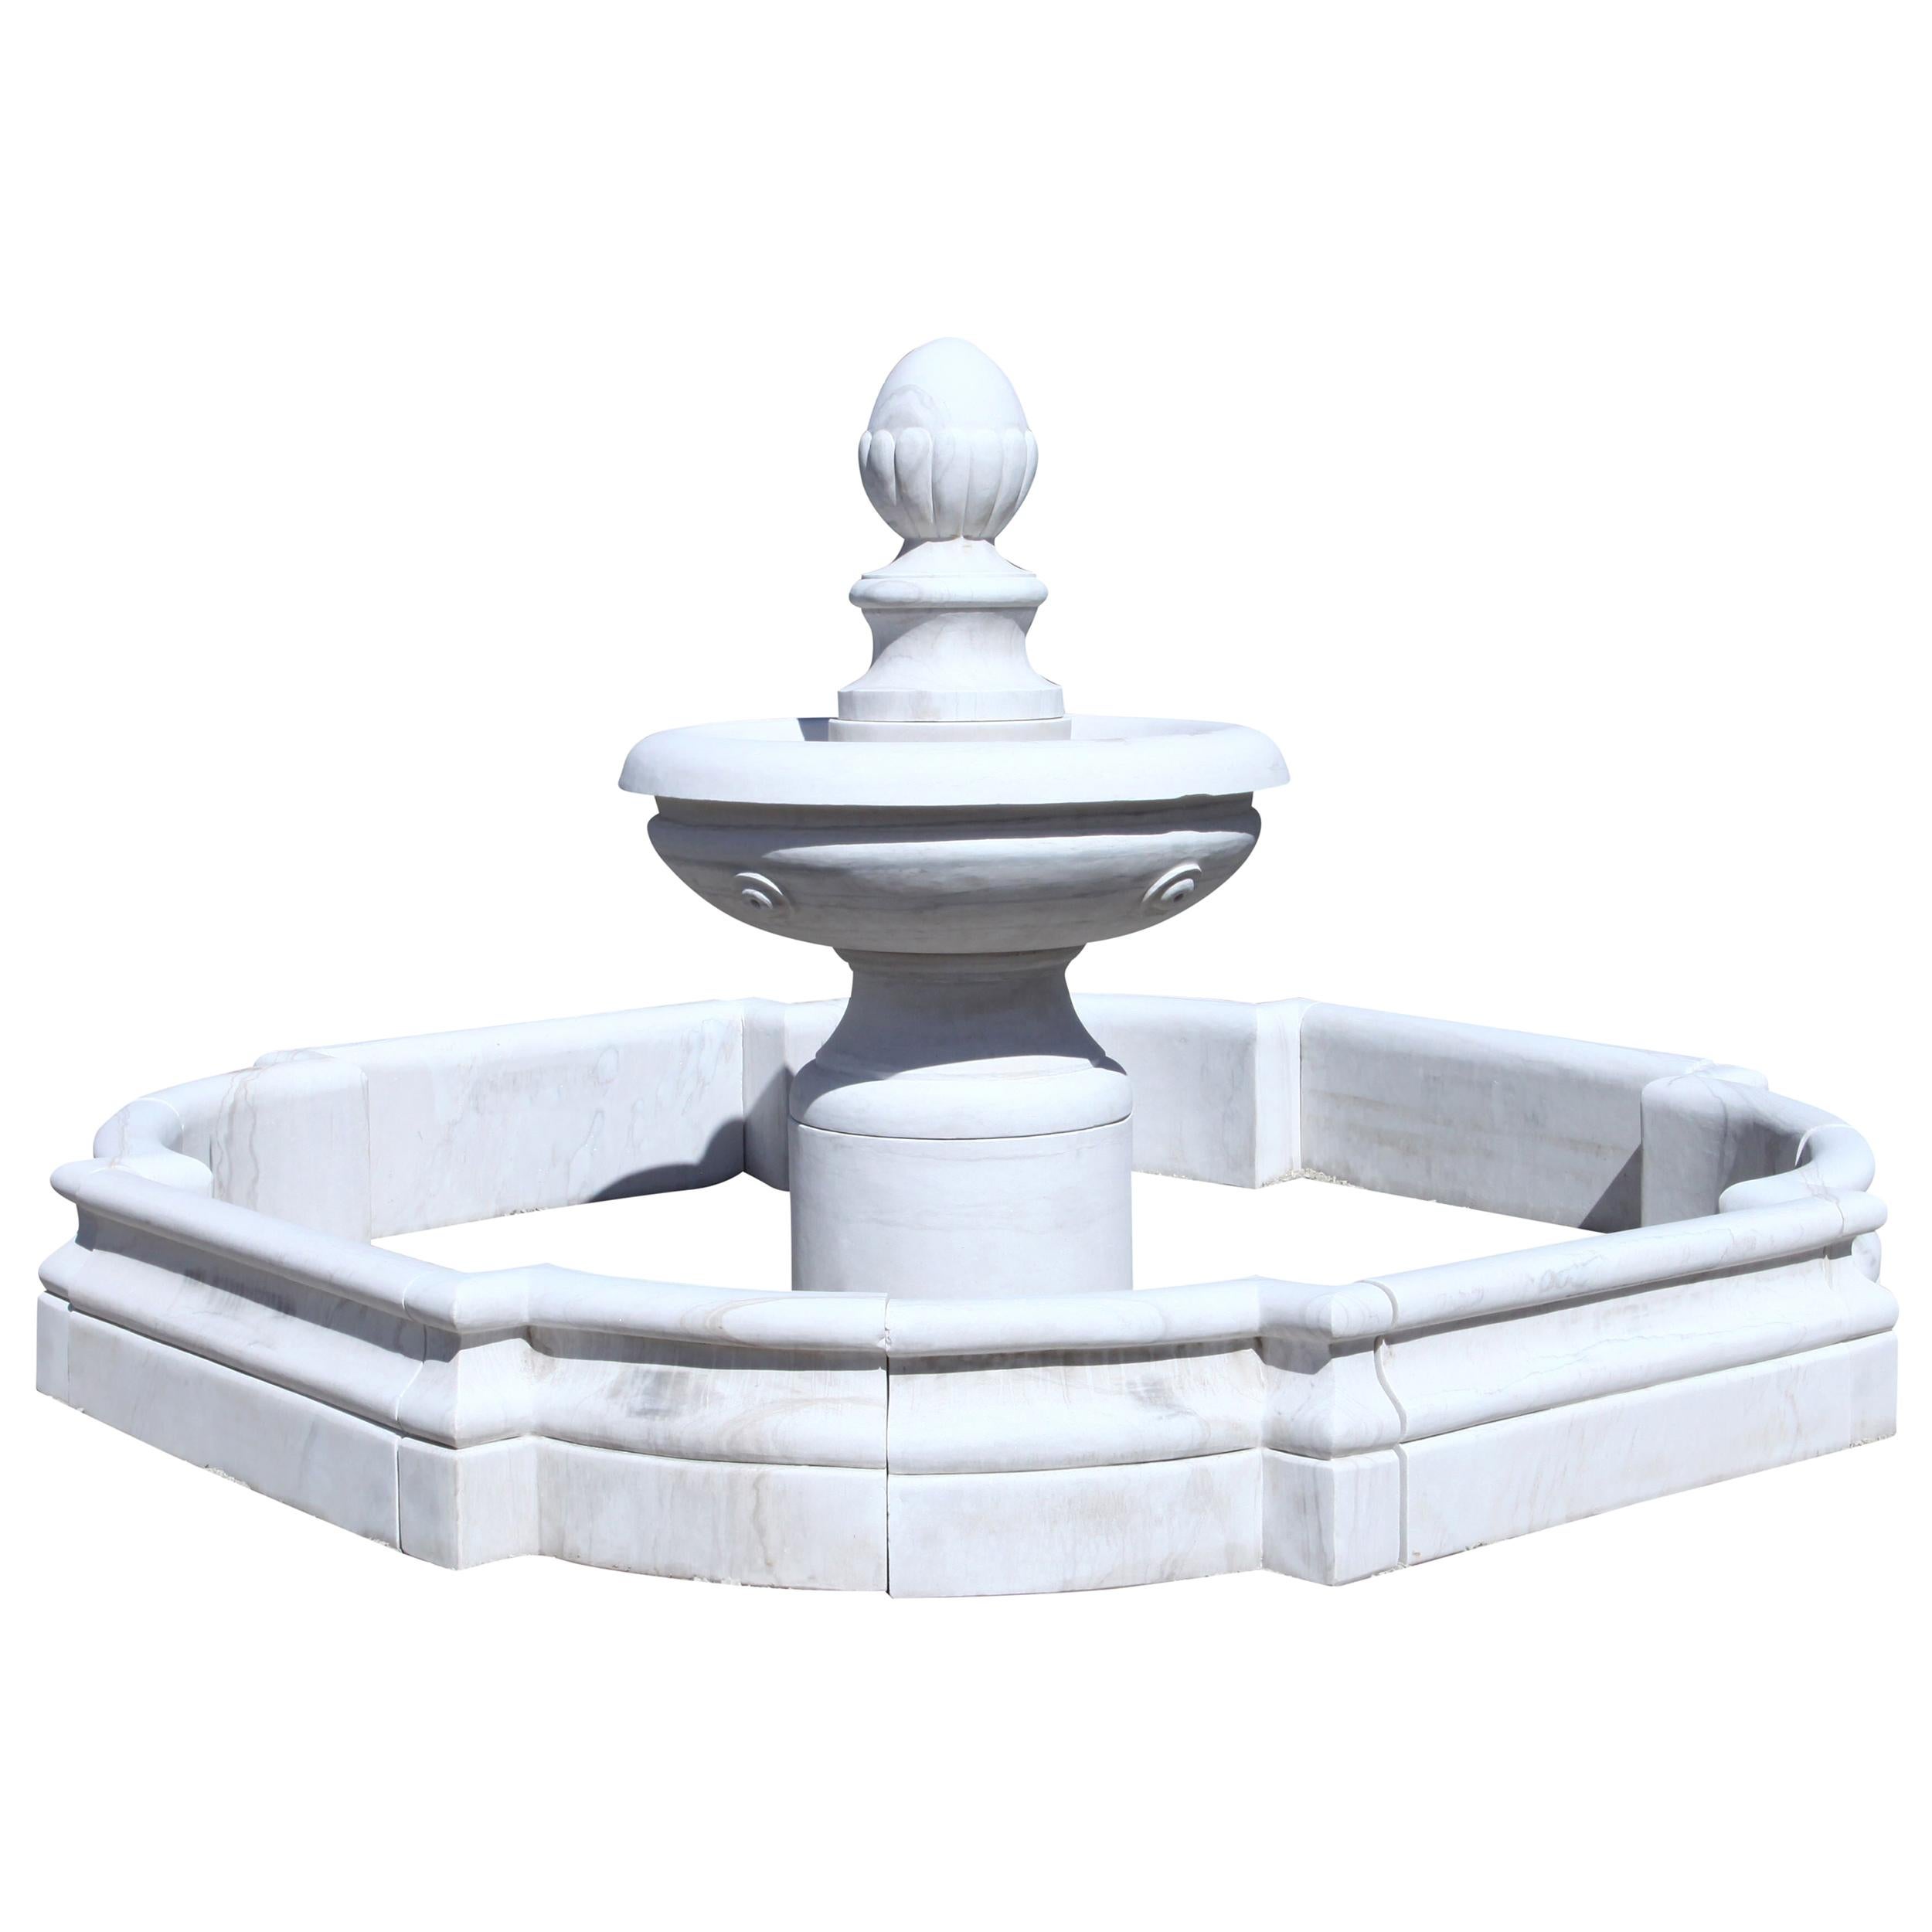 Courtly Marble Fountain, 21st Century